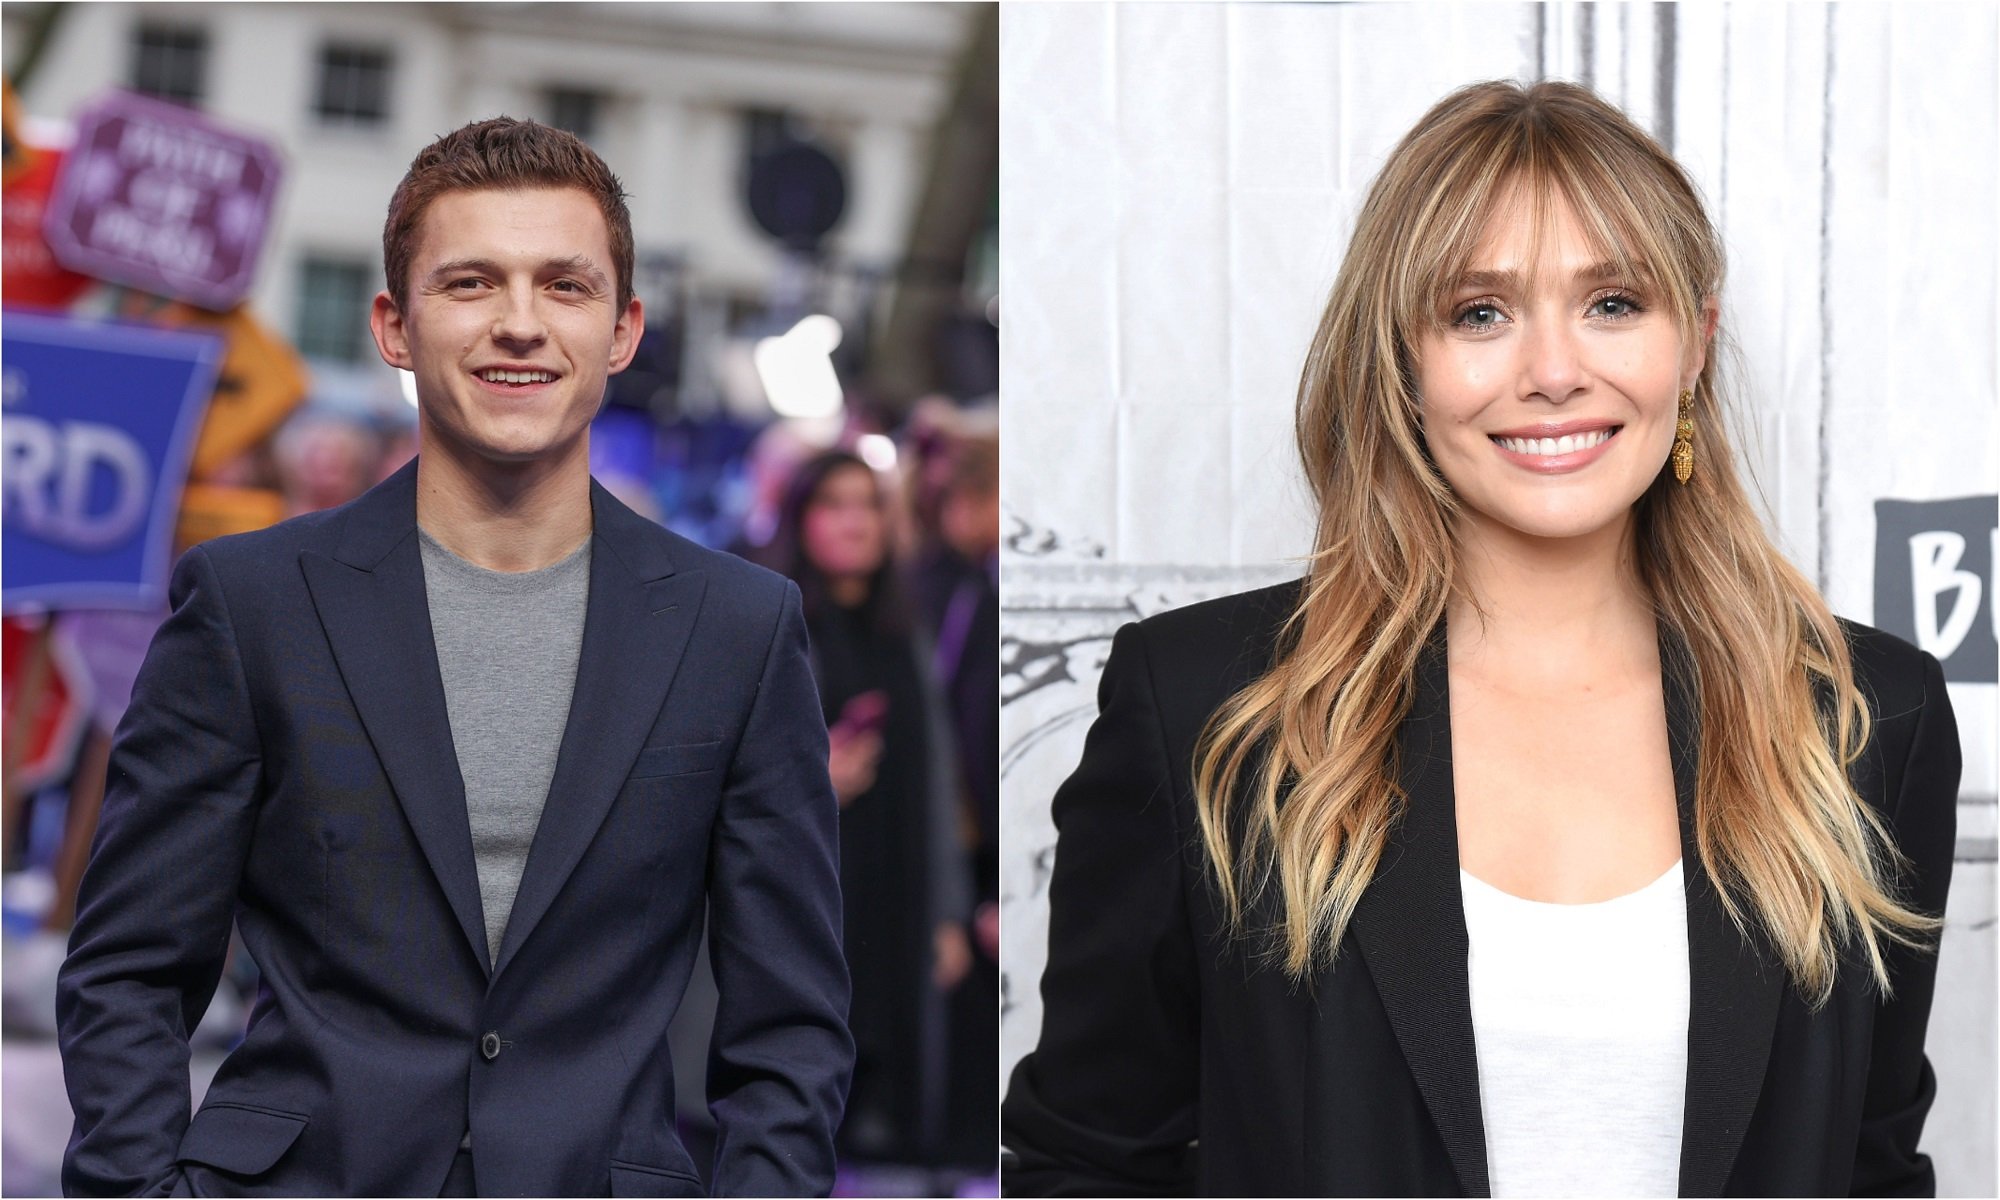 Tom Holland at the 'Onward' UK Premiere in 2020 and Elizabeth Olsen smiles at the camera while visiting the Build Series in 2019